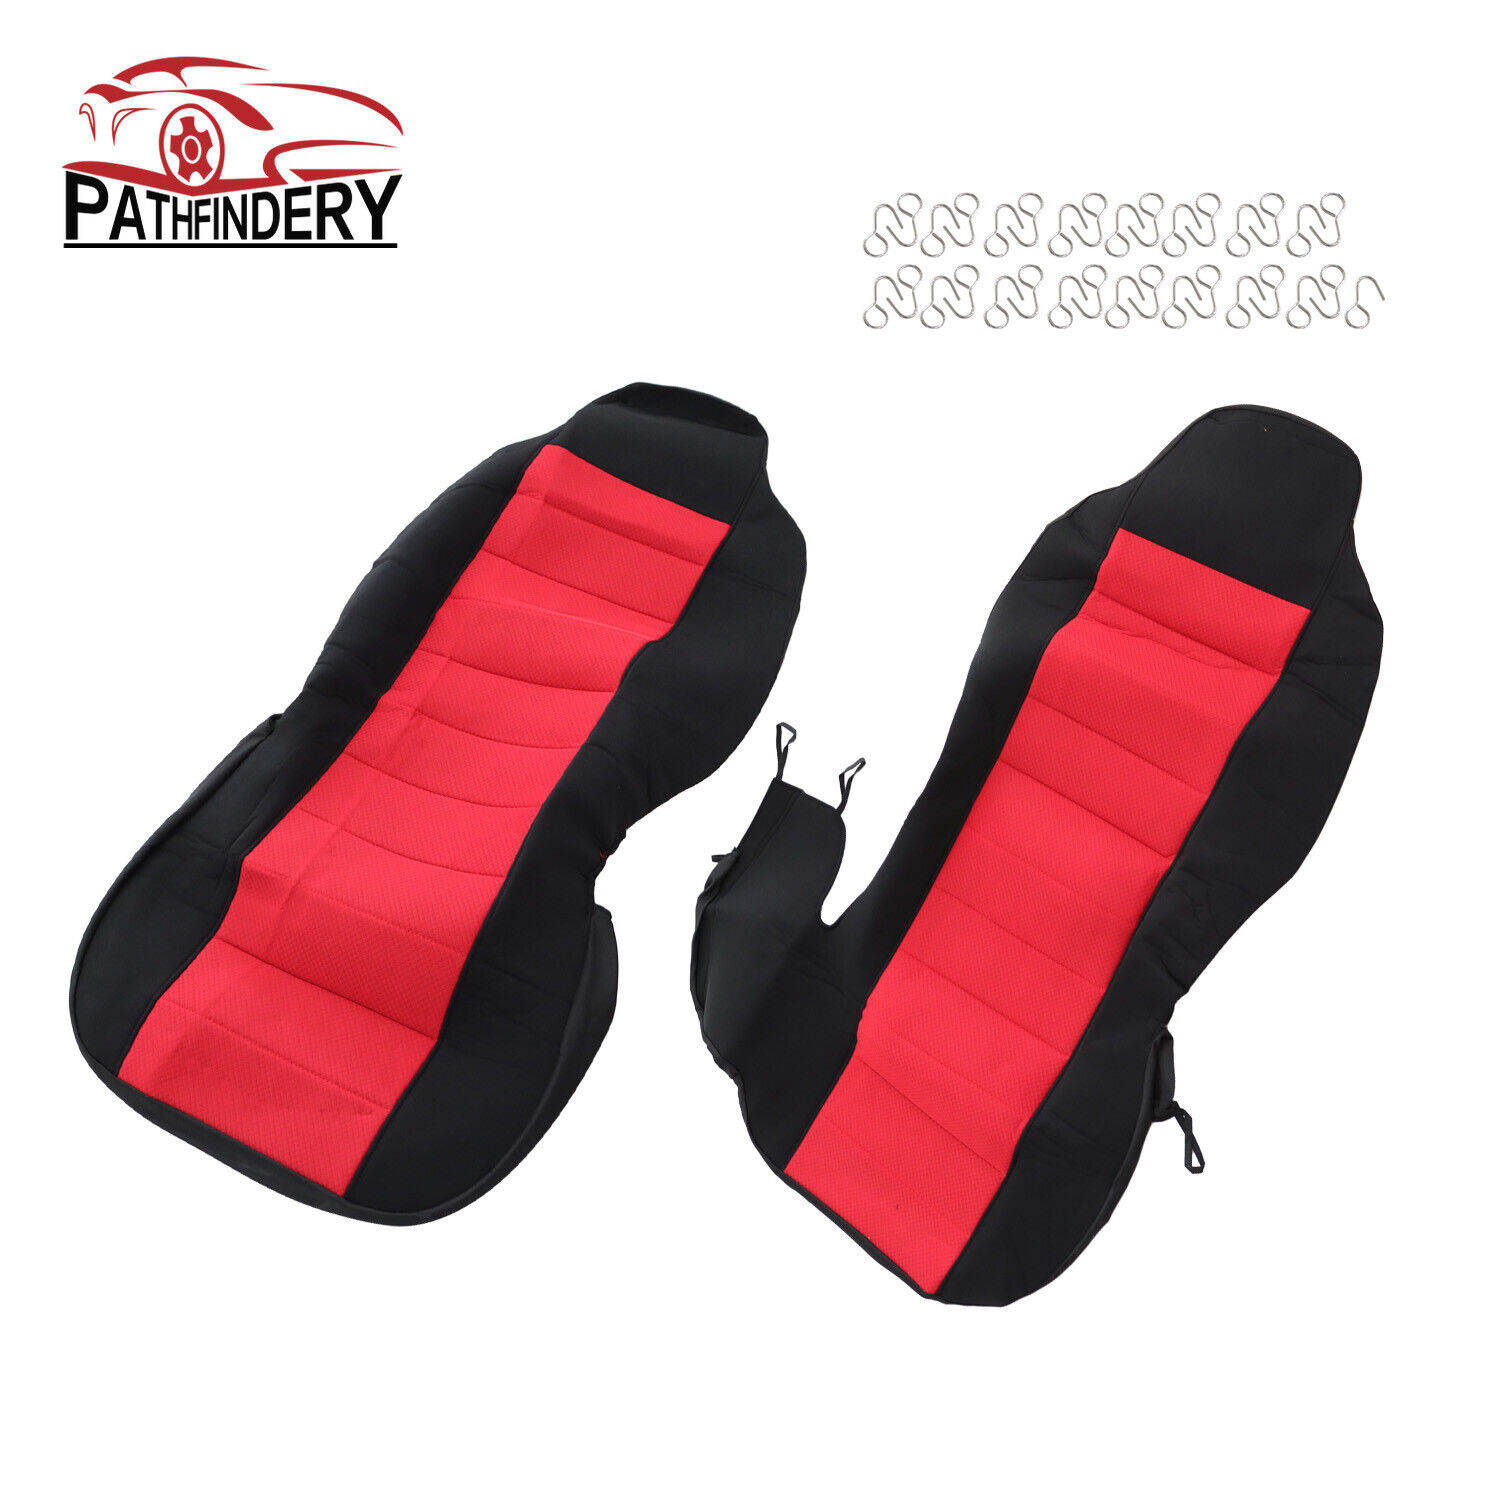 2PC Front Car Seat Cover Replacement For Ford Ranger 2004-2012 60/40 Highback 